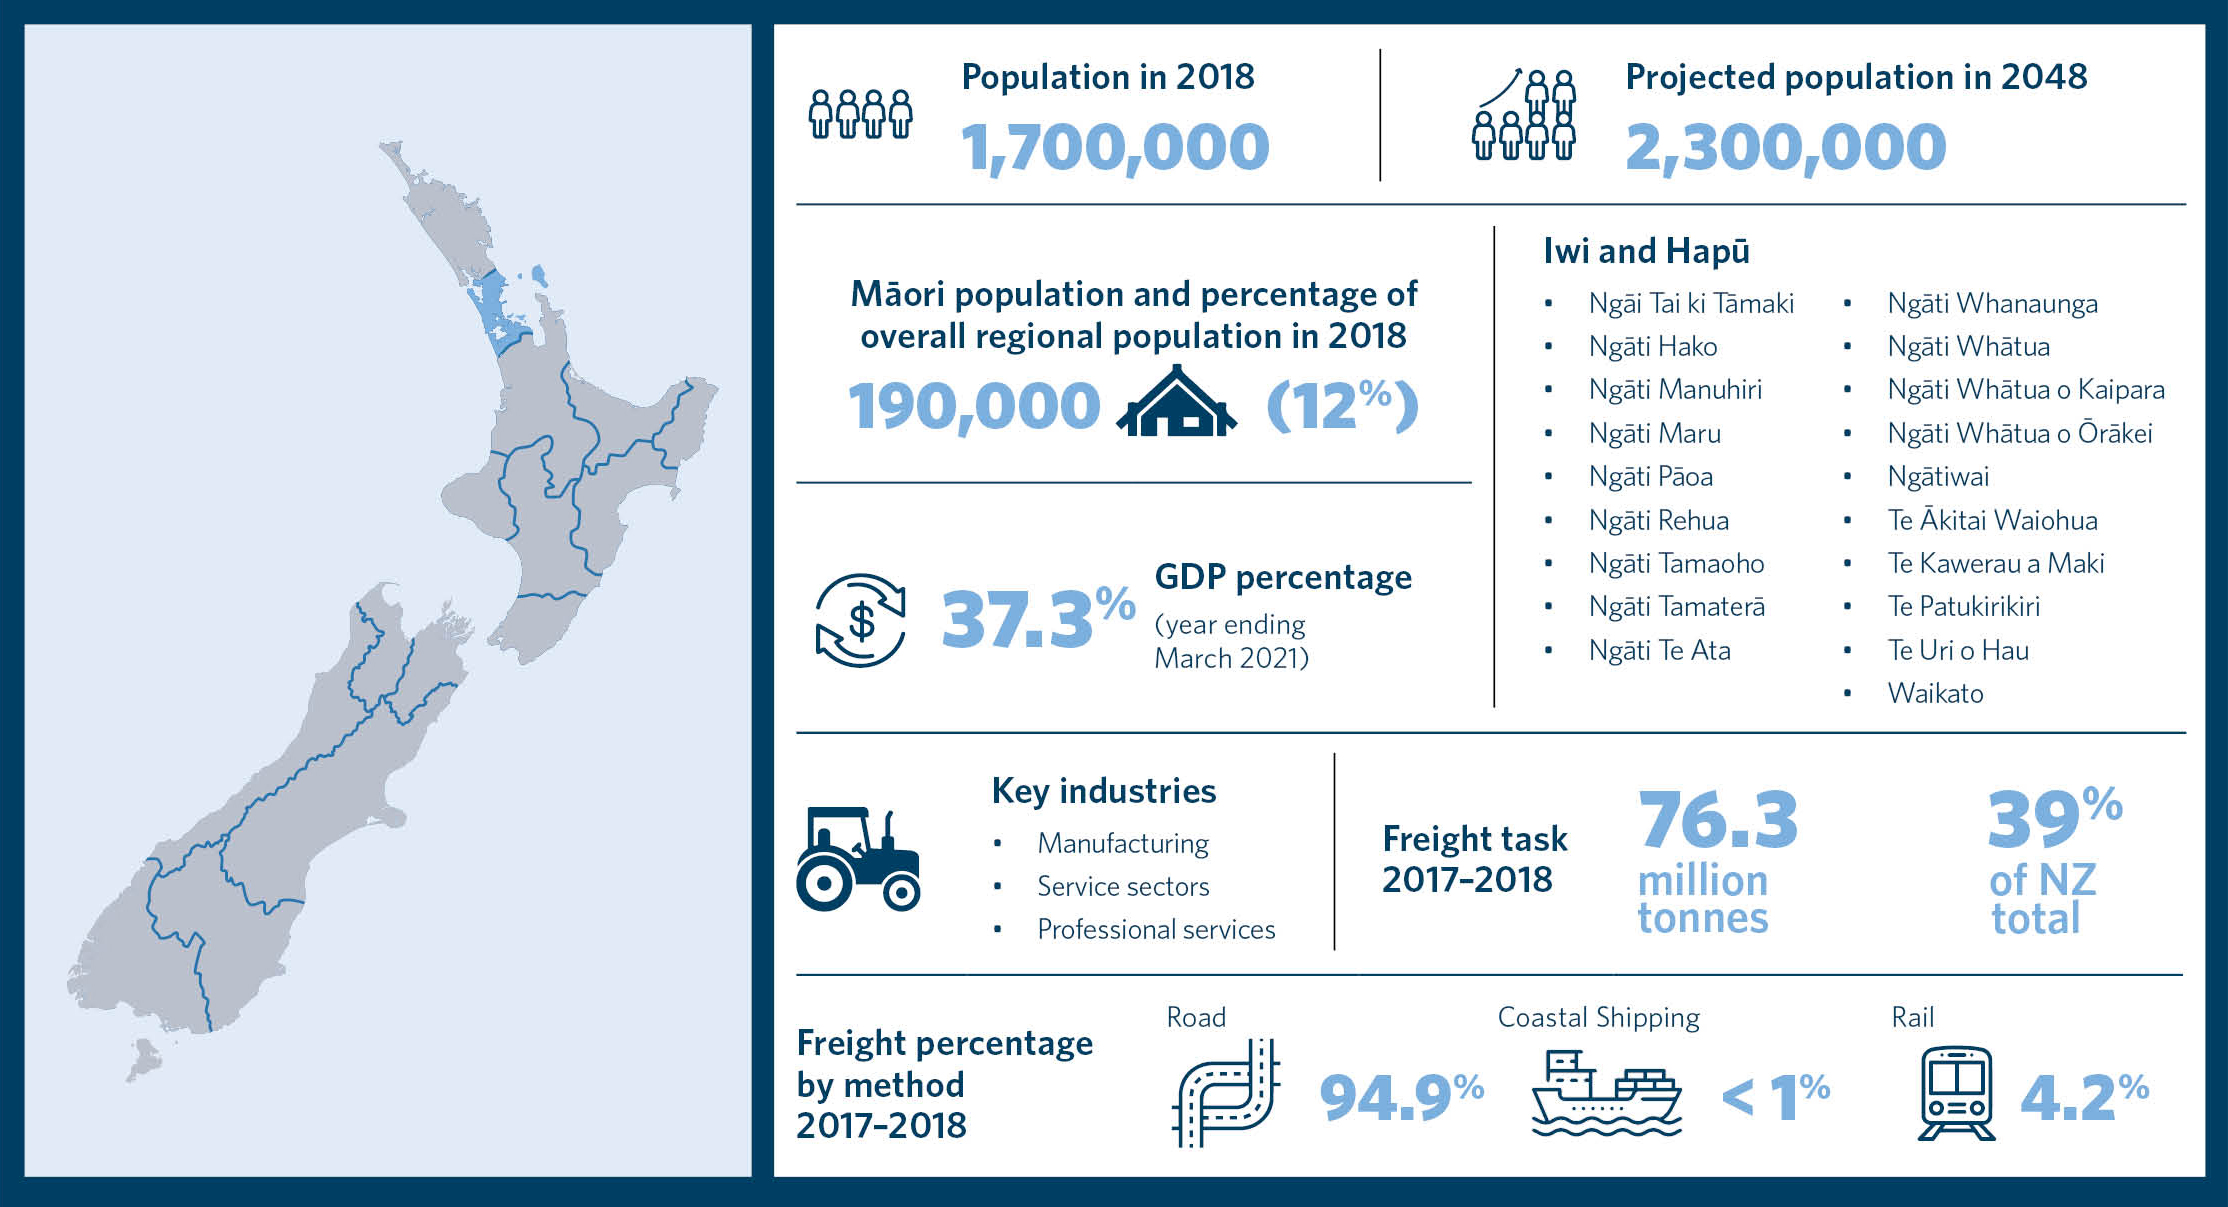 This is an infographic showing statistics for the region of Tāmaki Makaurau Auckland. It includes information about the population in 2018, projected population in 2048, Māori population and percentage of overall regional population in 2018, a list of iwi